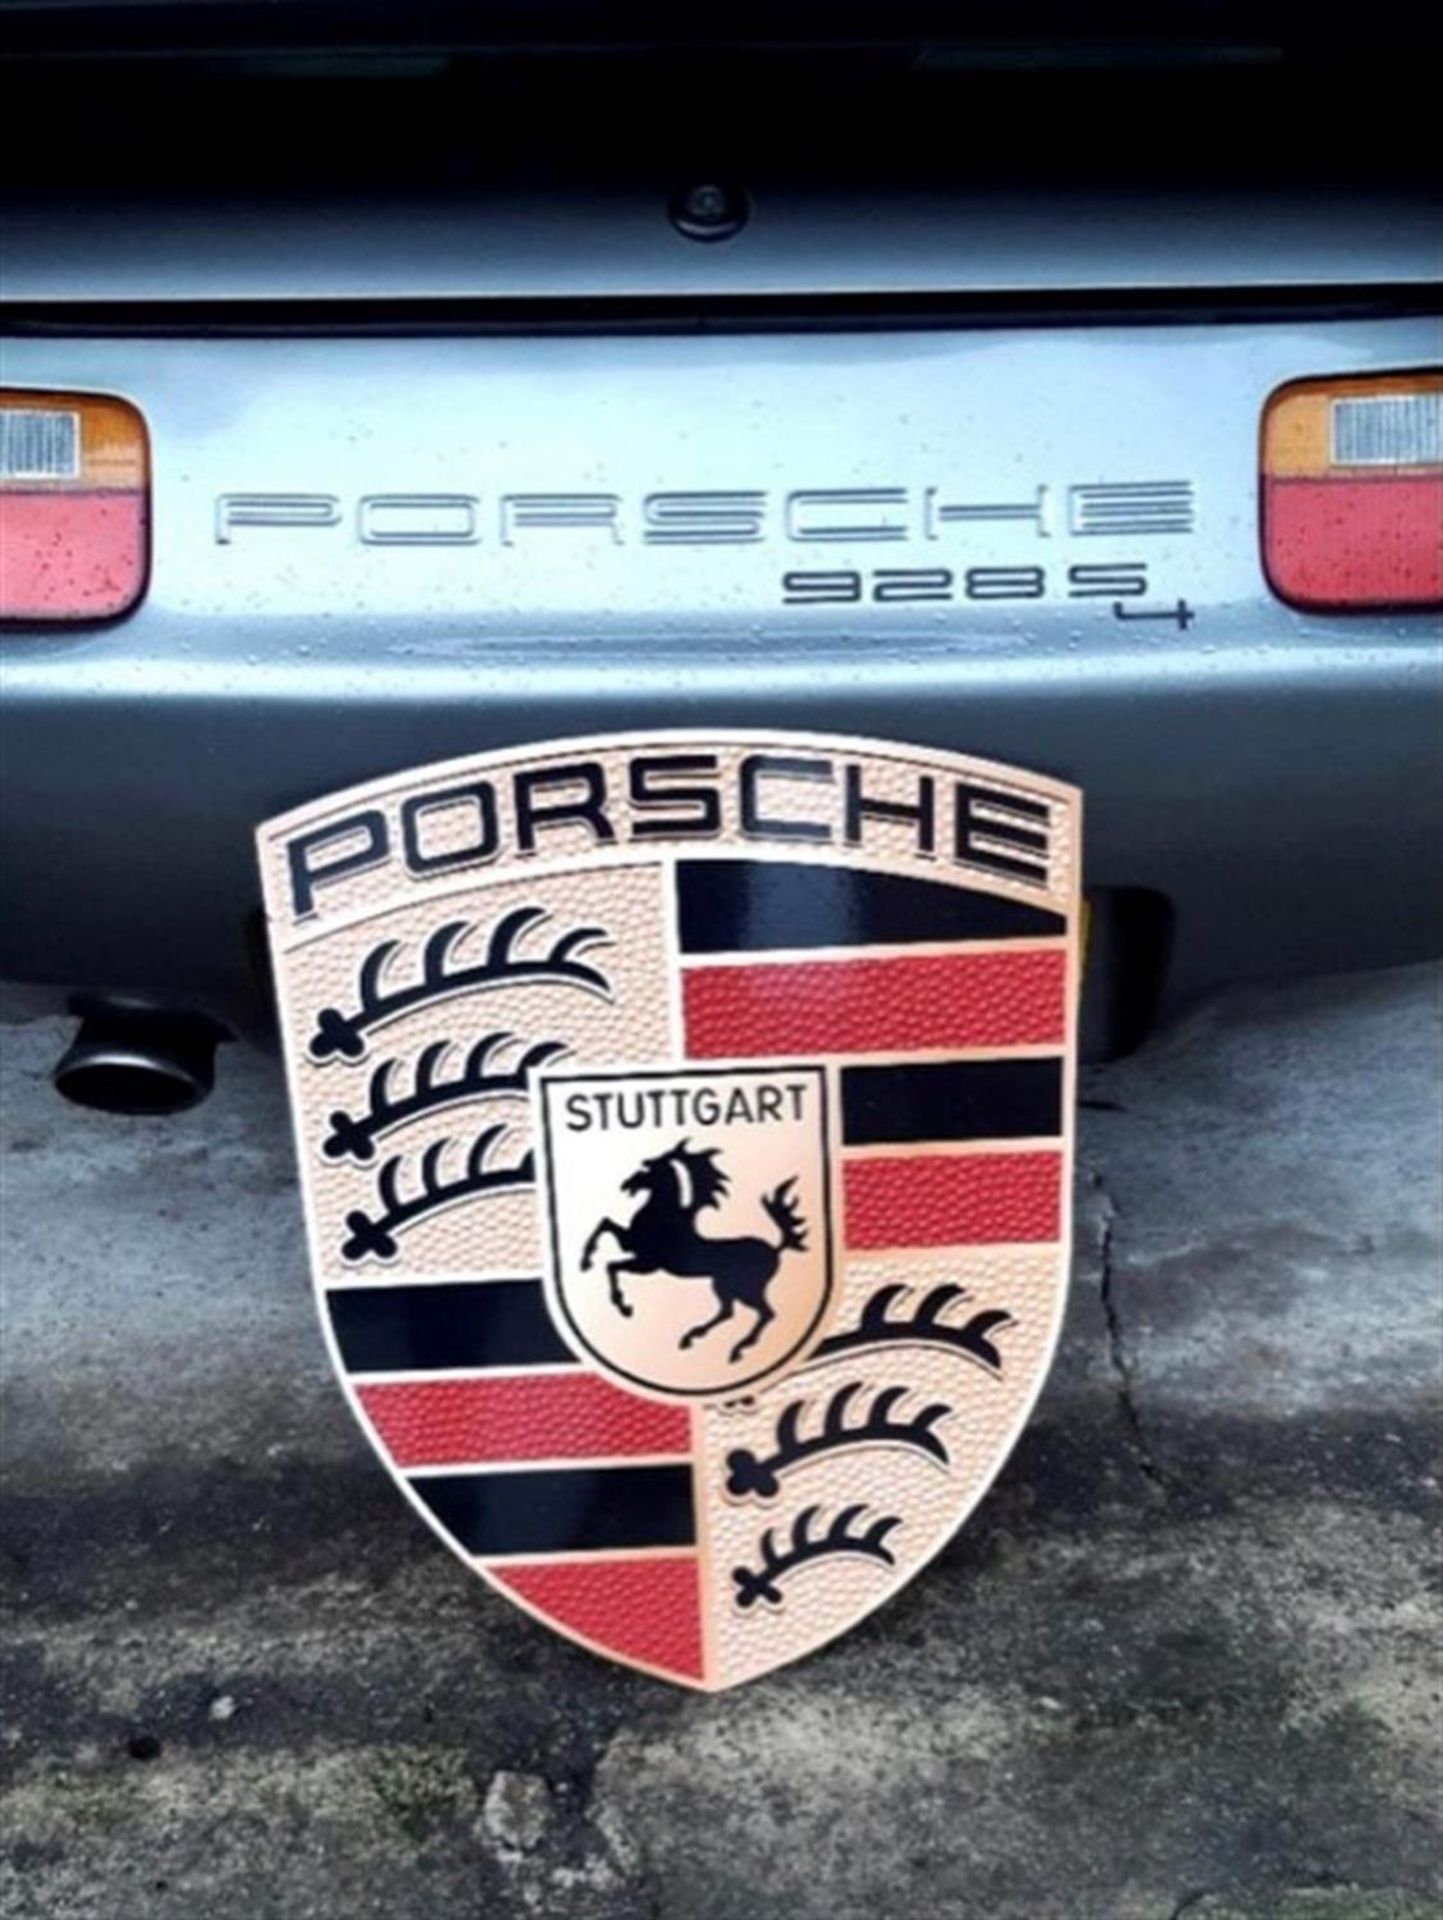 A Superb and Much Sought After Pair of Porsche Dealership-Type Metal Wall Signs - Image 5 of 5